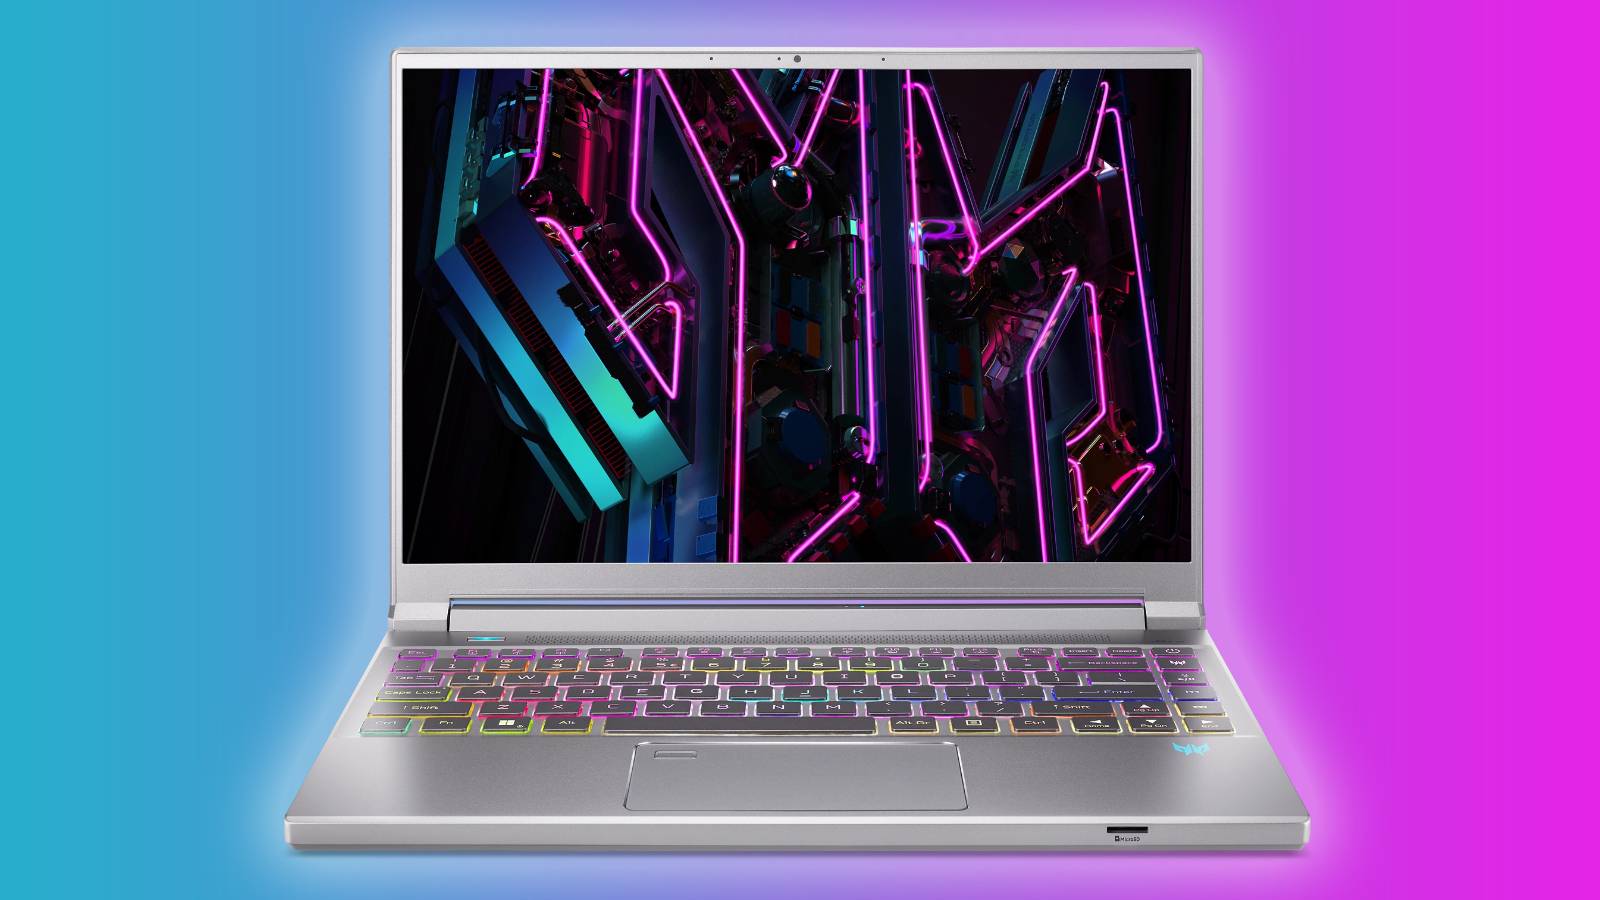 Image of the Acer Predator Triton 14 Gaming/Creator Laptop, on a blue and pink background.